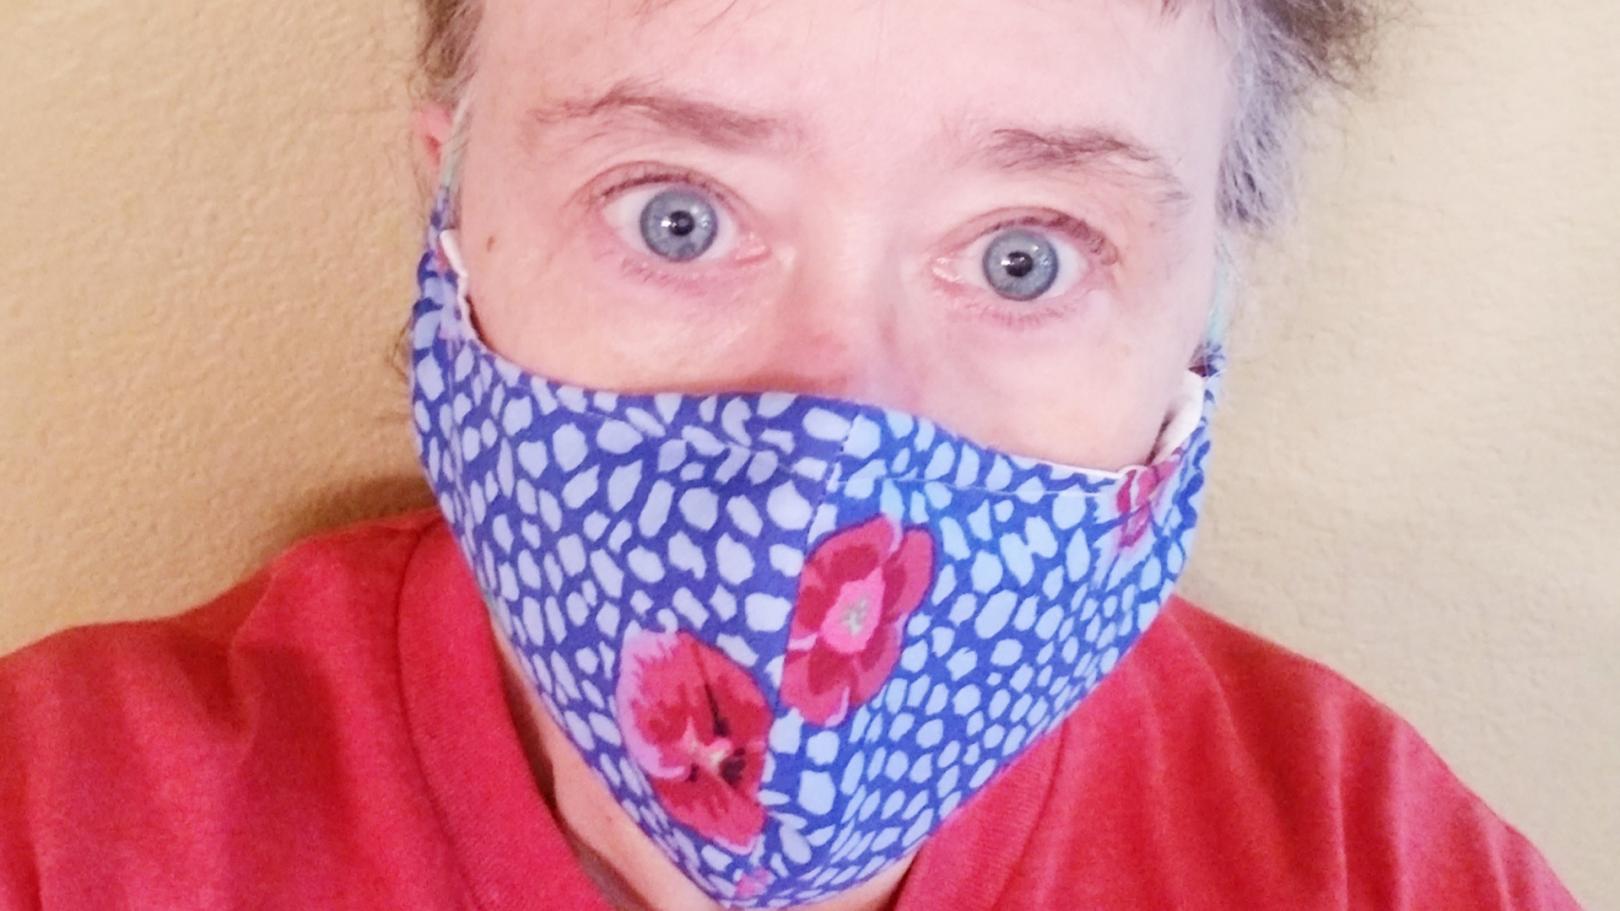 Woman wearing one of the face masks donated to health care workers